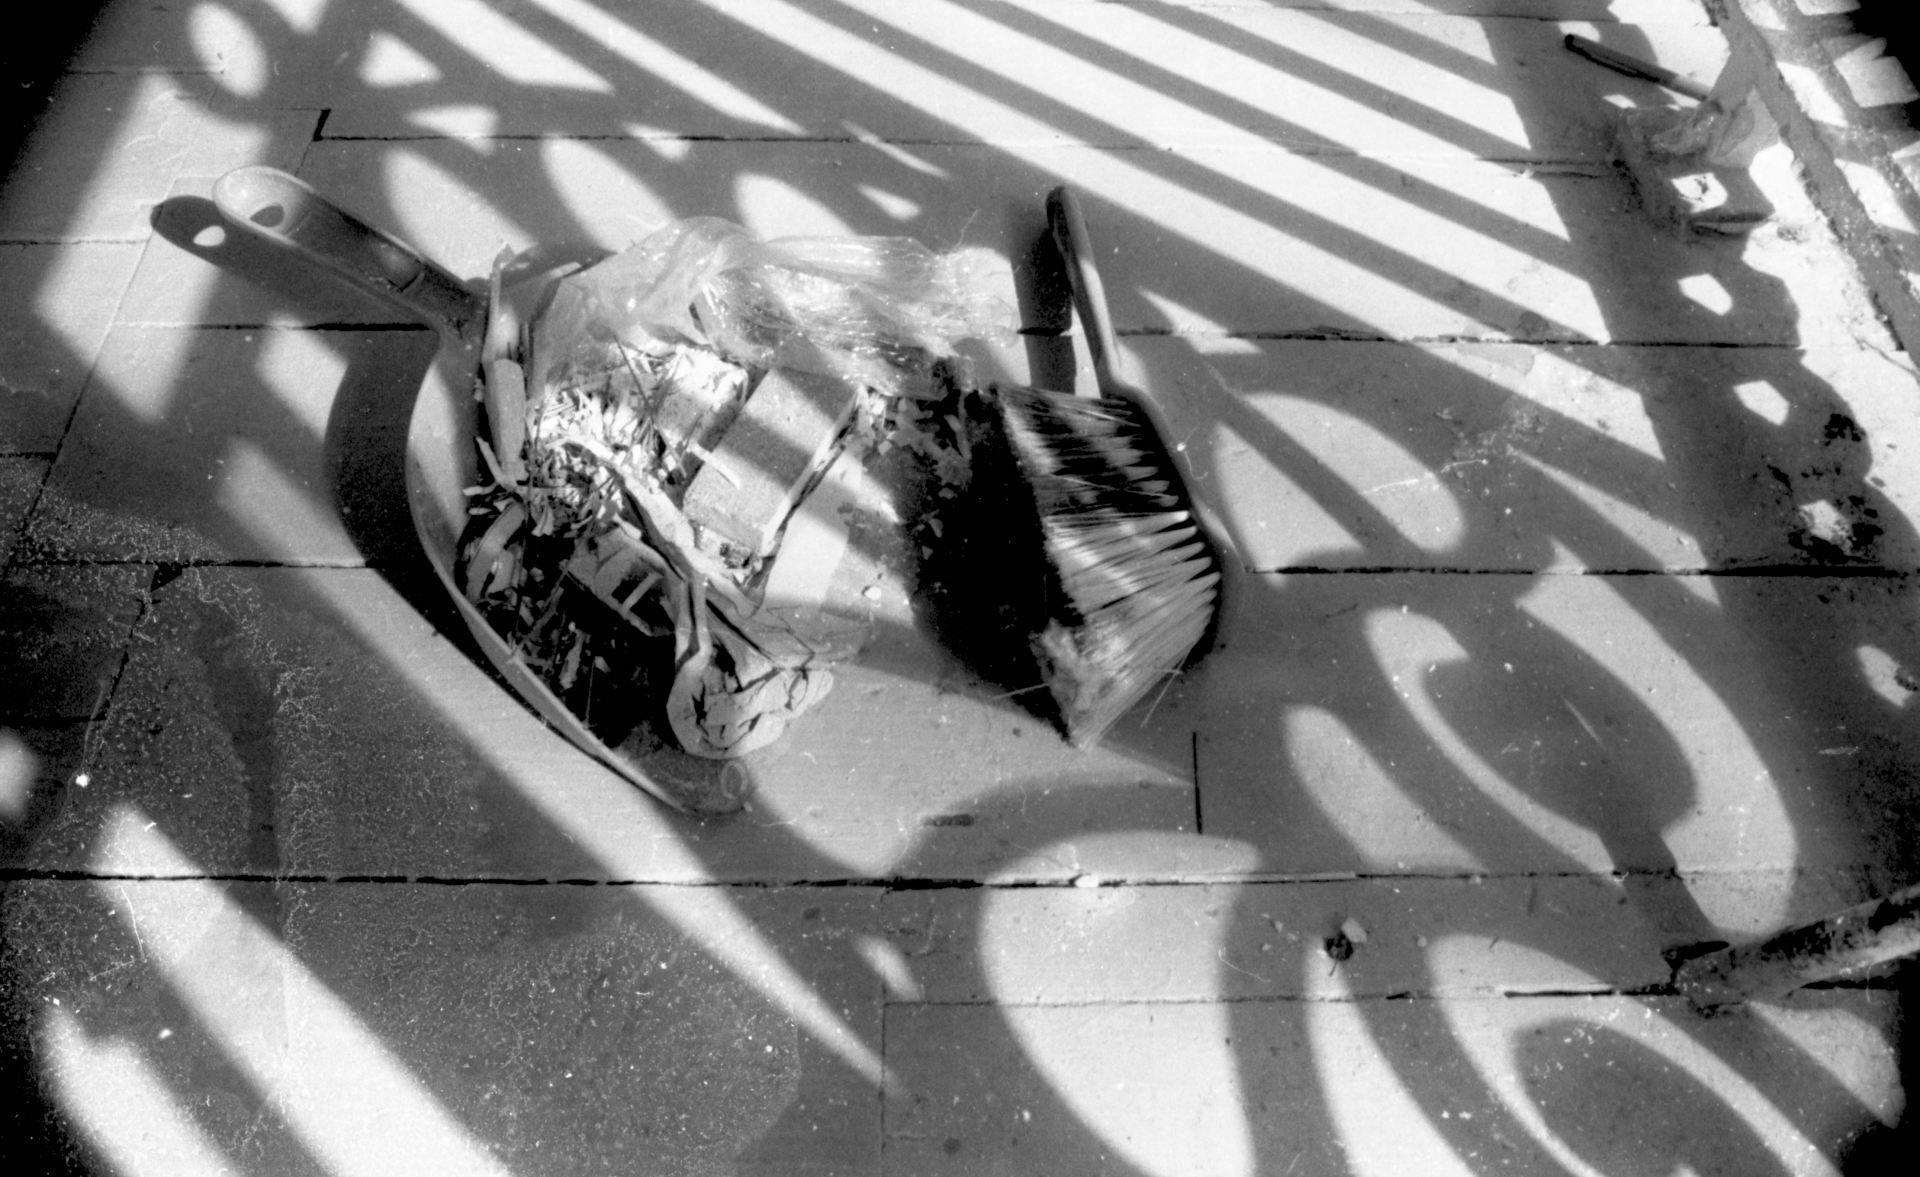 A black and white photograph of a dustpan and brush.